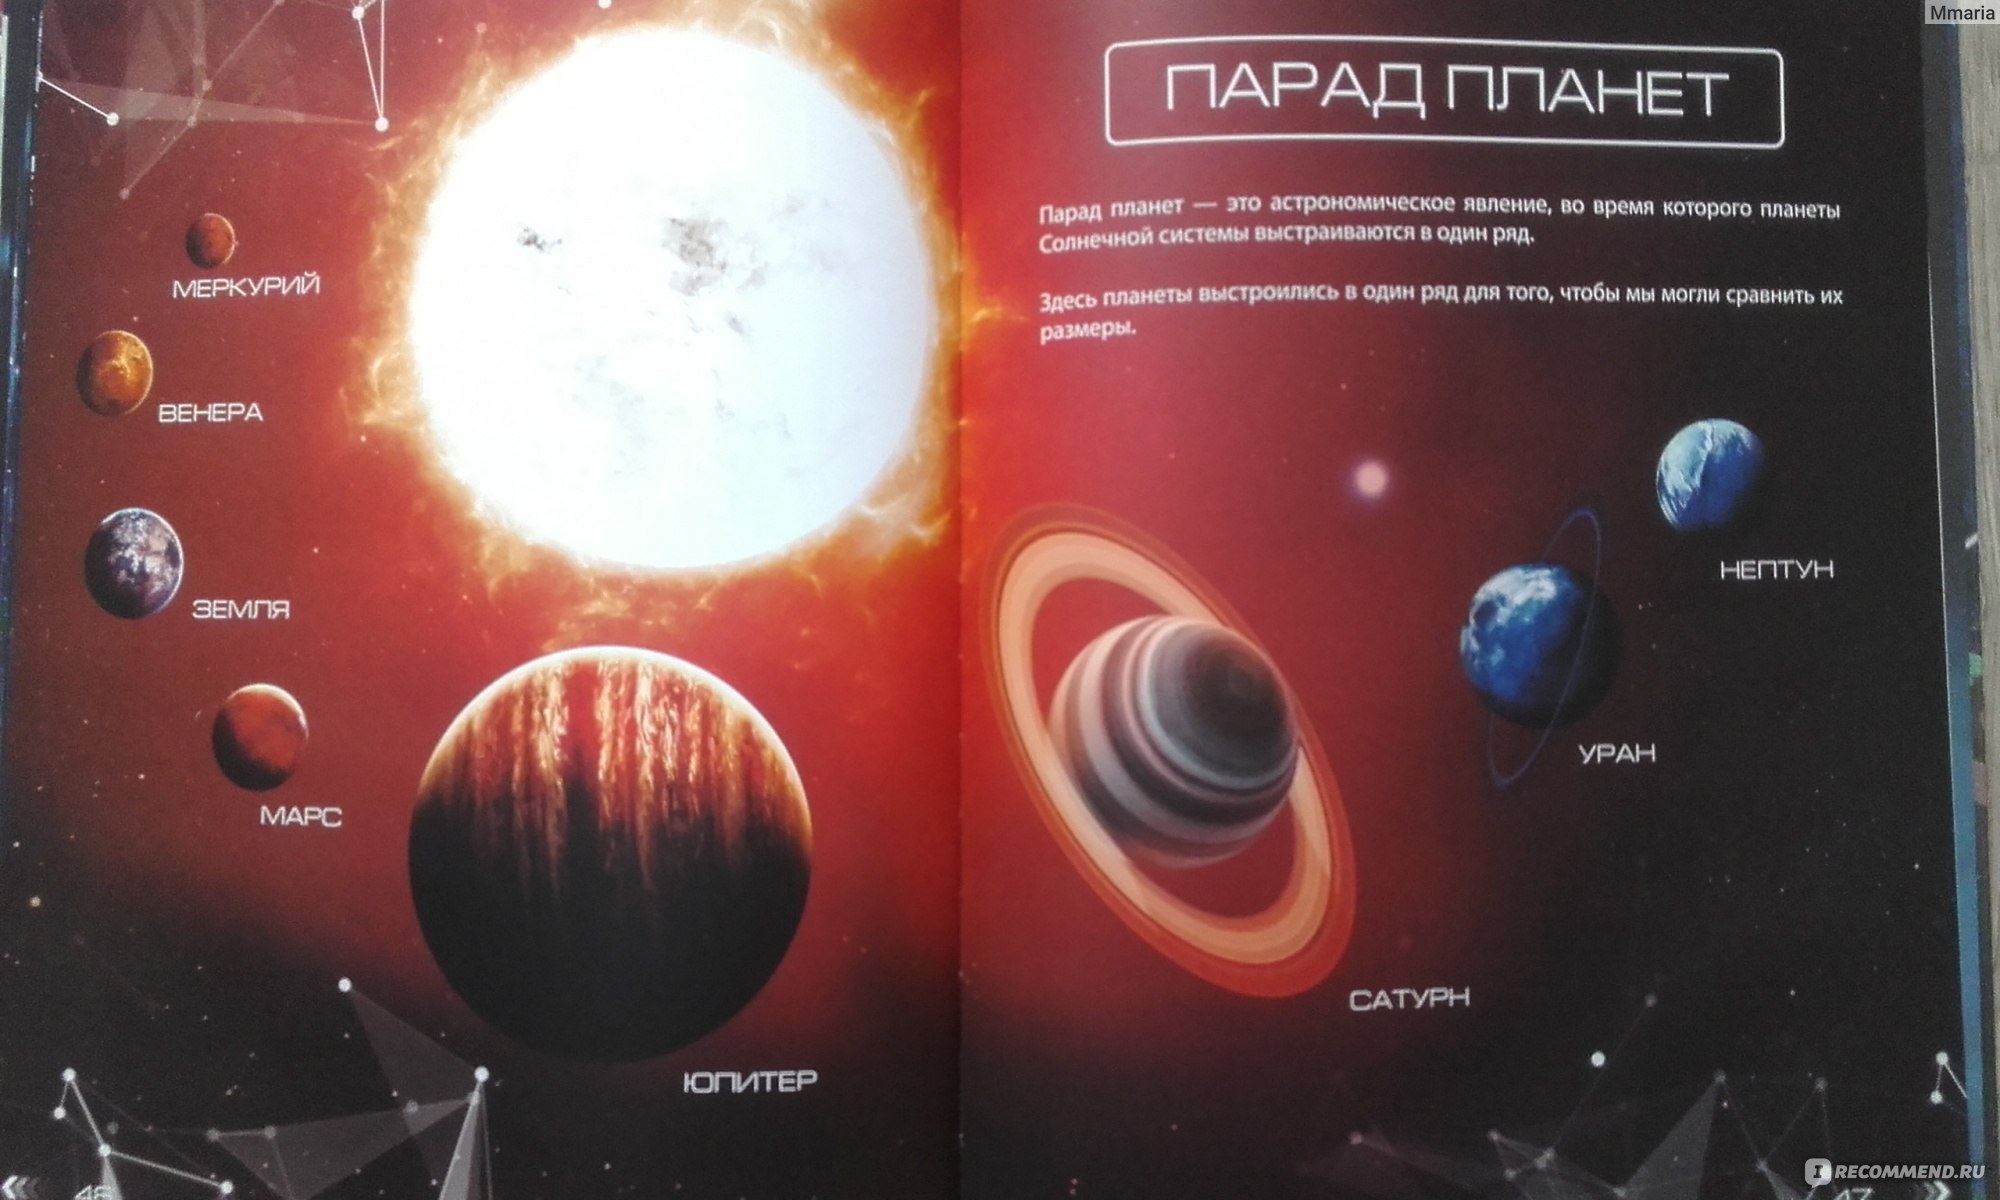 Parade of planets avec. "Парад планет" 1984г. Парад планет Королев. Парад планет 1999. Парад планет аптека.